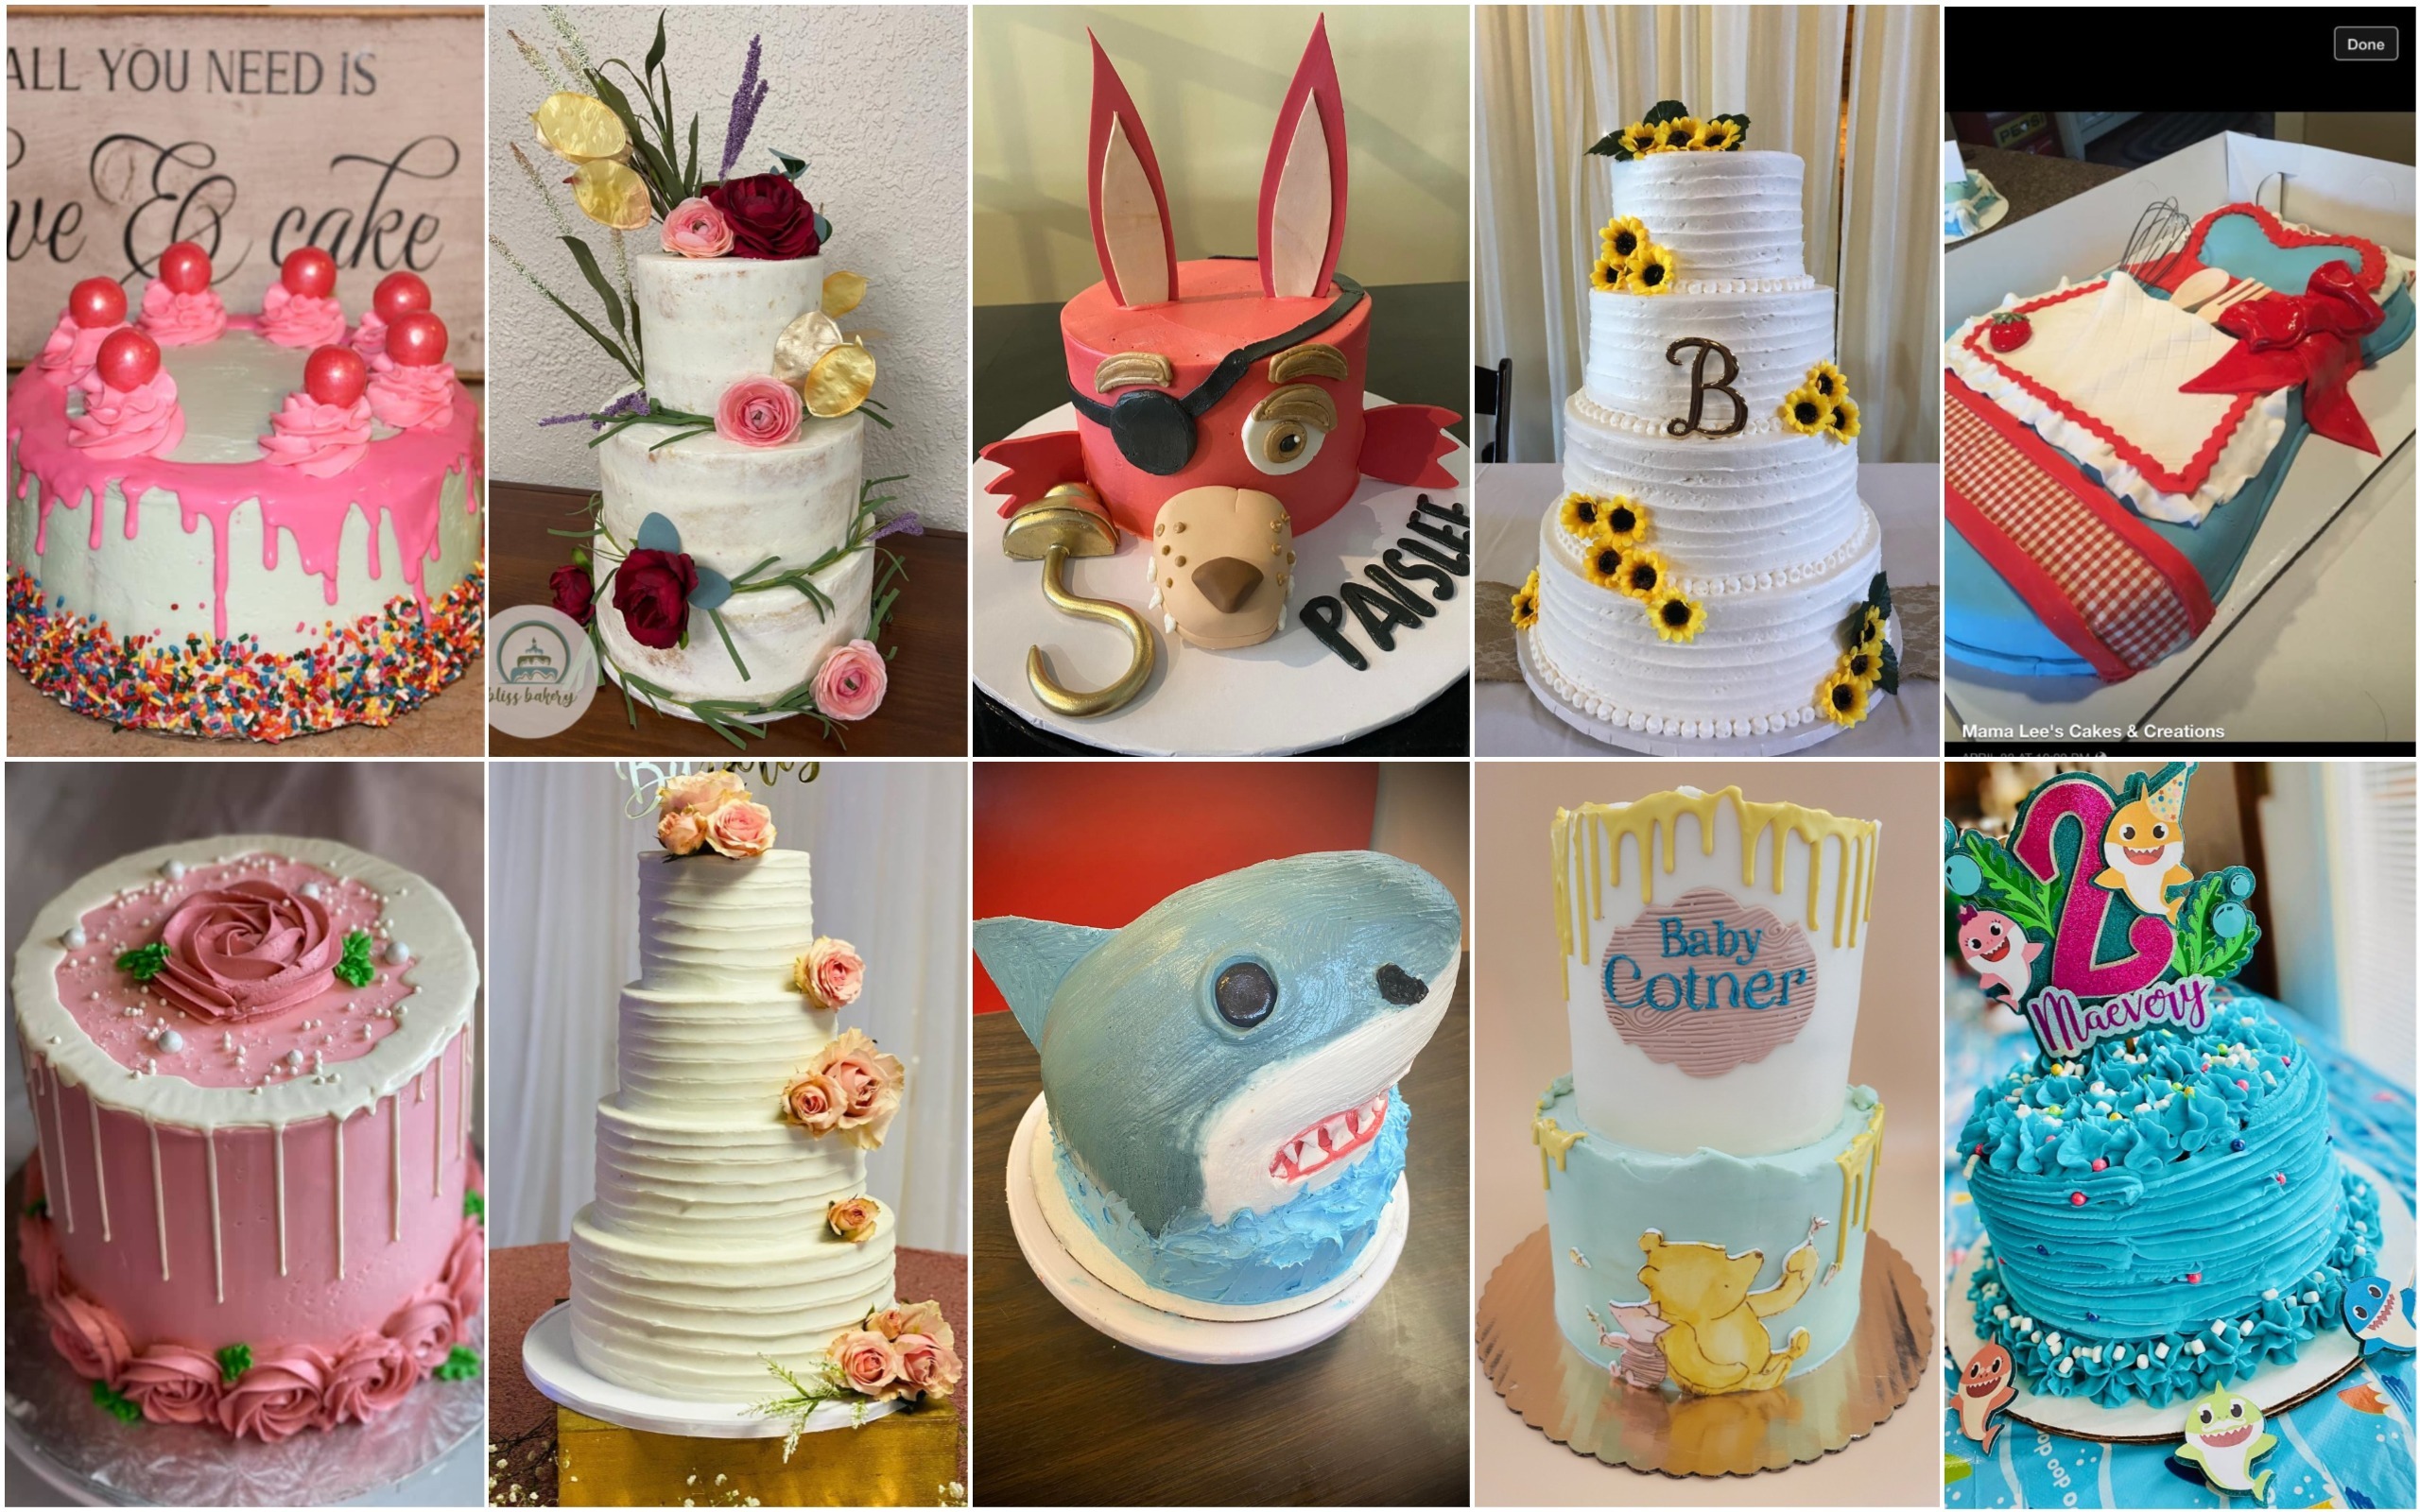 19 Trends In Creative Cakes You Have To Check Out (and Eat!)